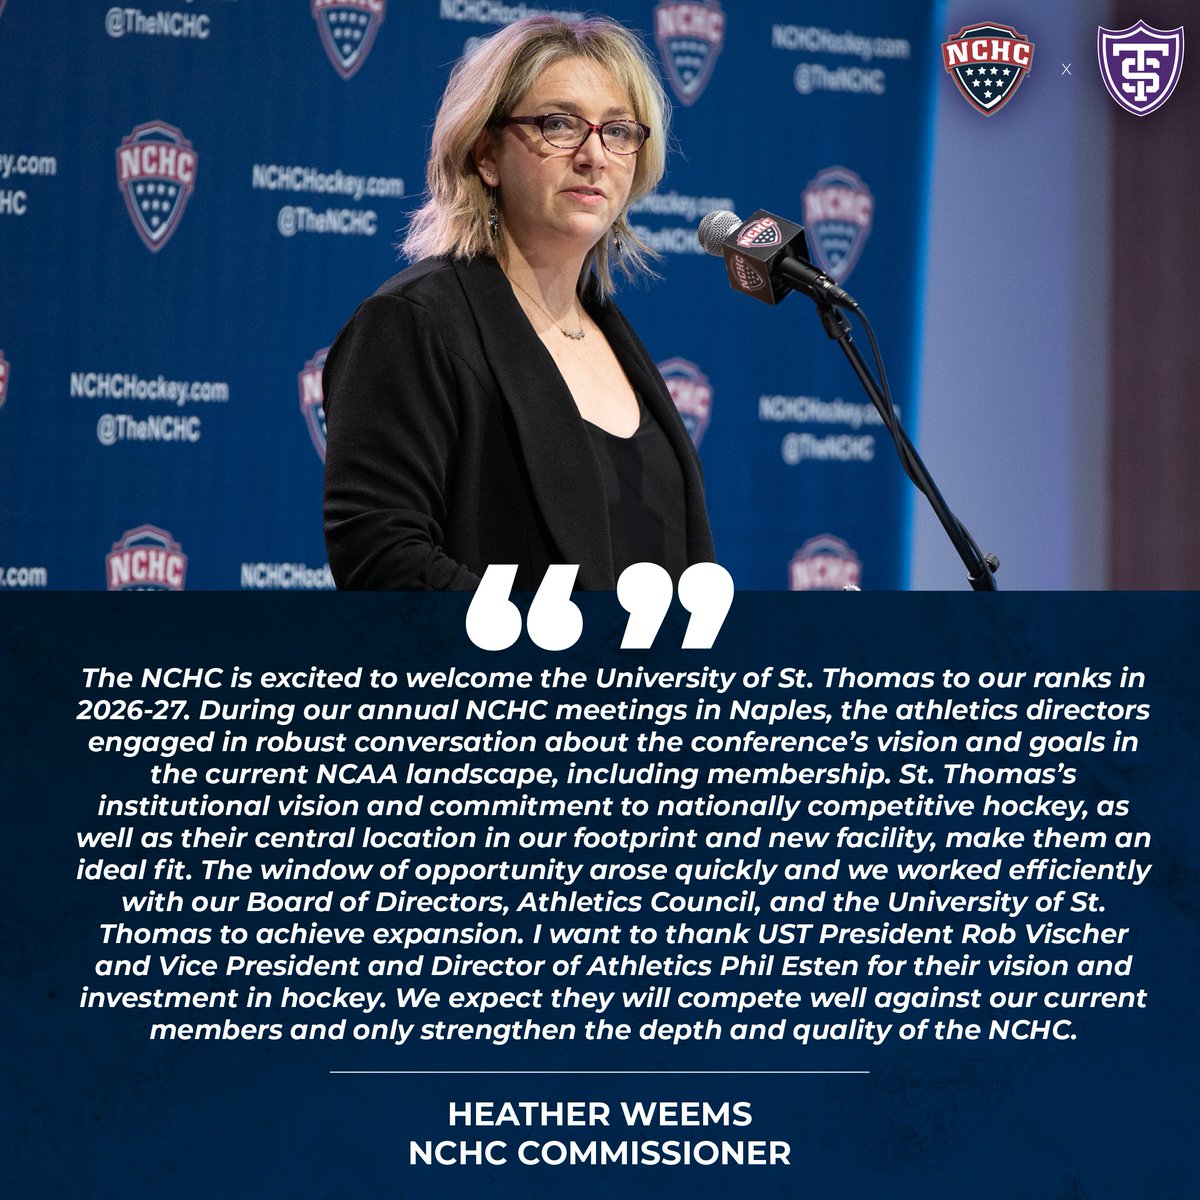 A new facility. Another team in the State of Hockey. And an even number of members. @Commish_Weems shares what makes @TommieMHockey a great fit for #NCHChockey 🗣️